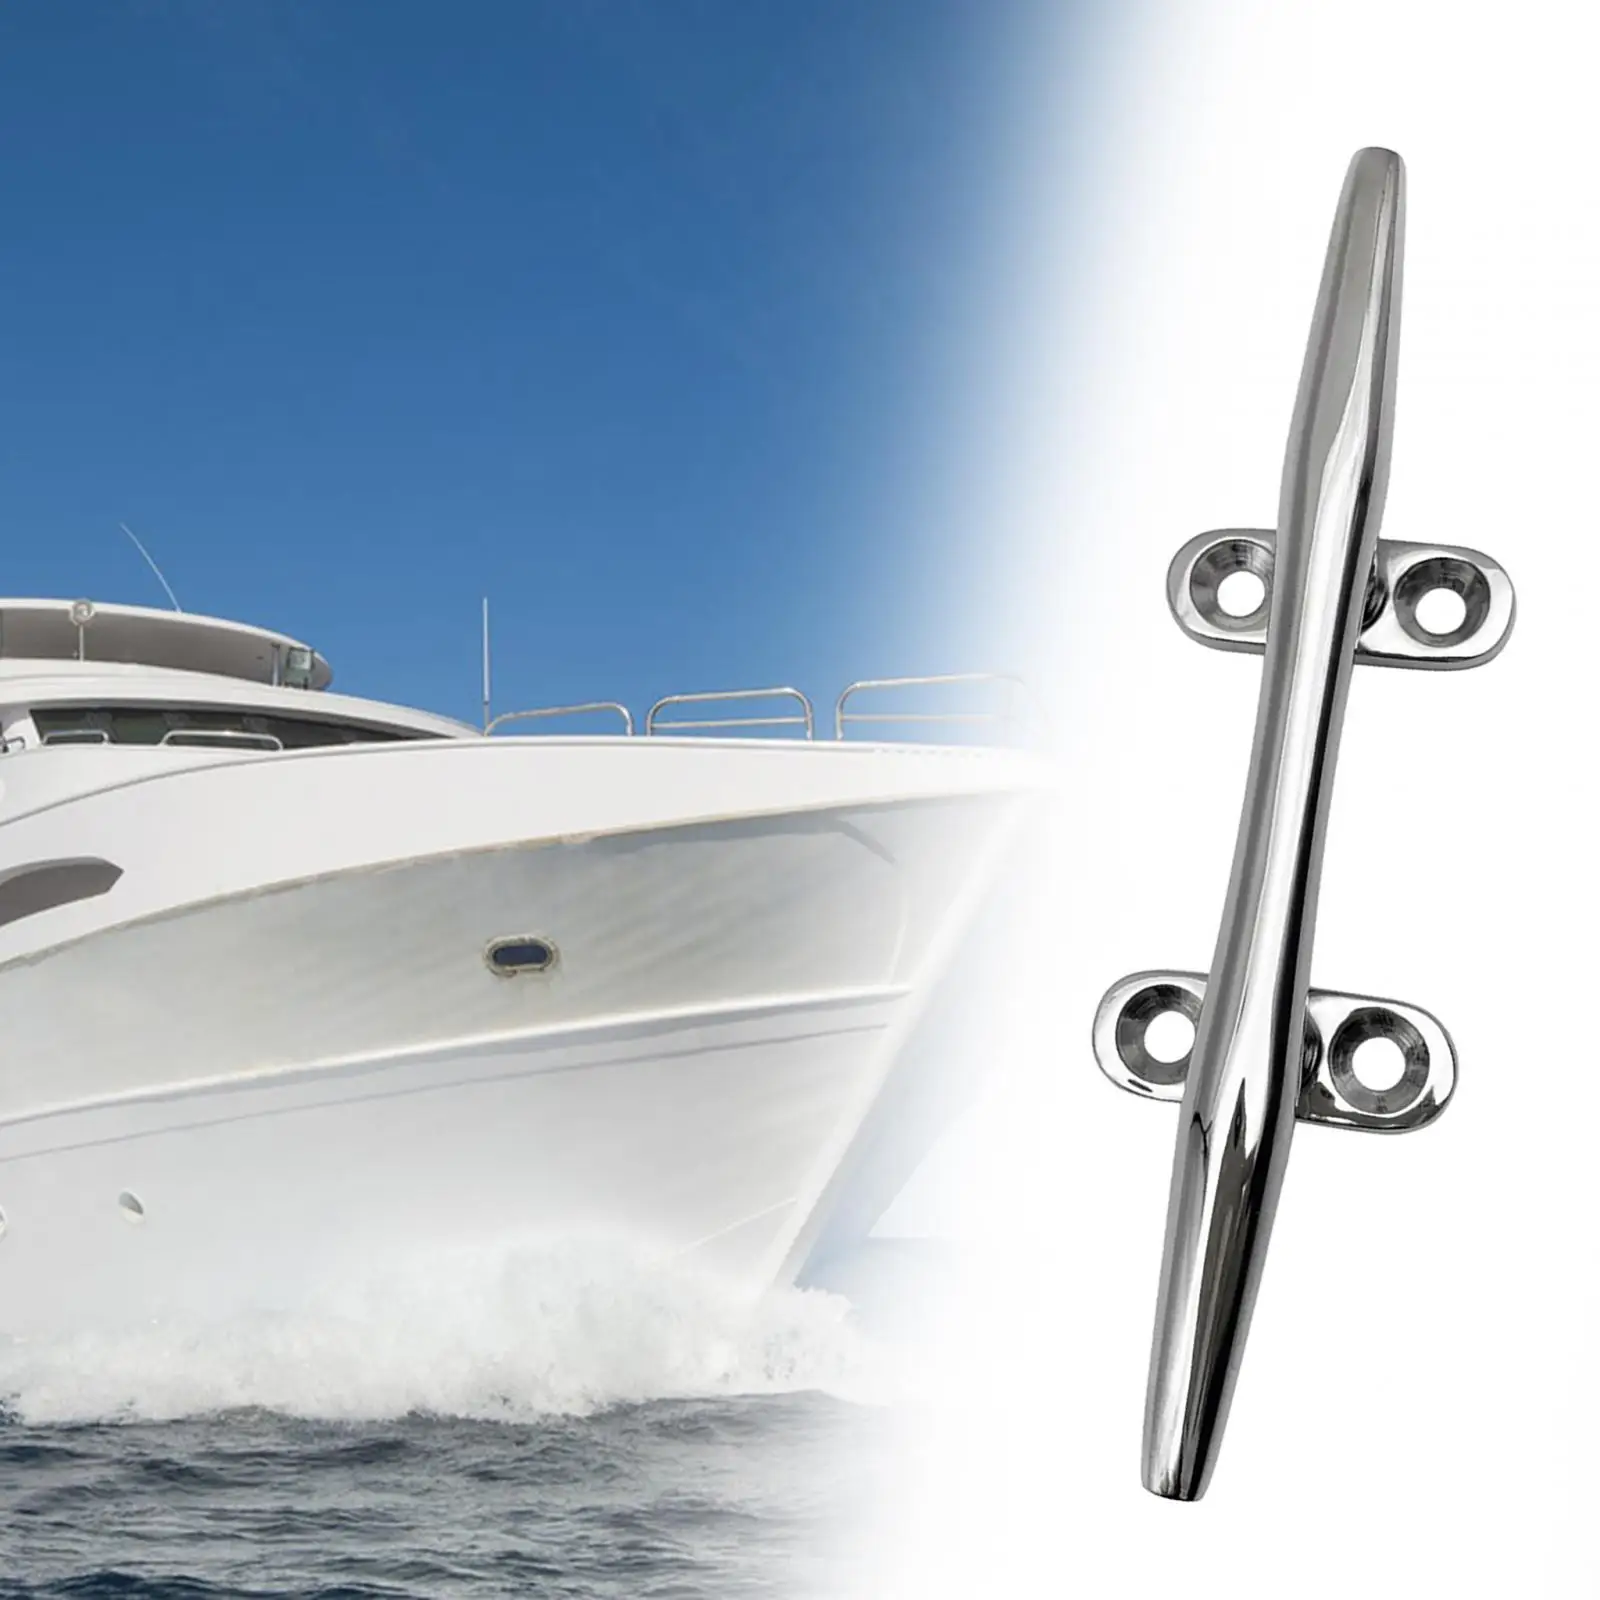 Marine Boat Hardware Premium Durable Screws Mount Wall Mount Heavy Duty Accessory for Boating Water Sports Ships Fishing